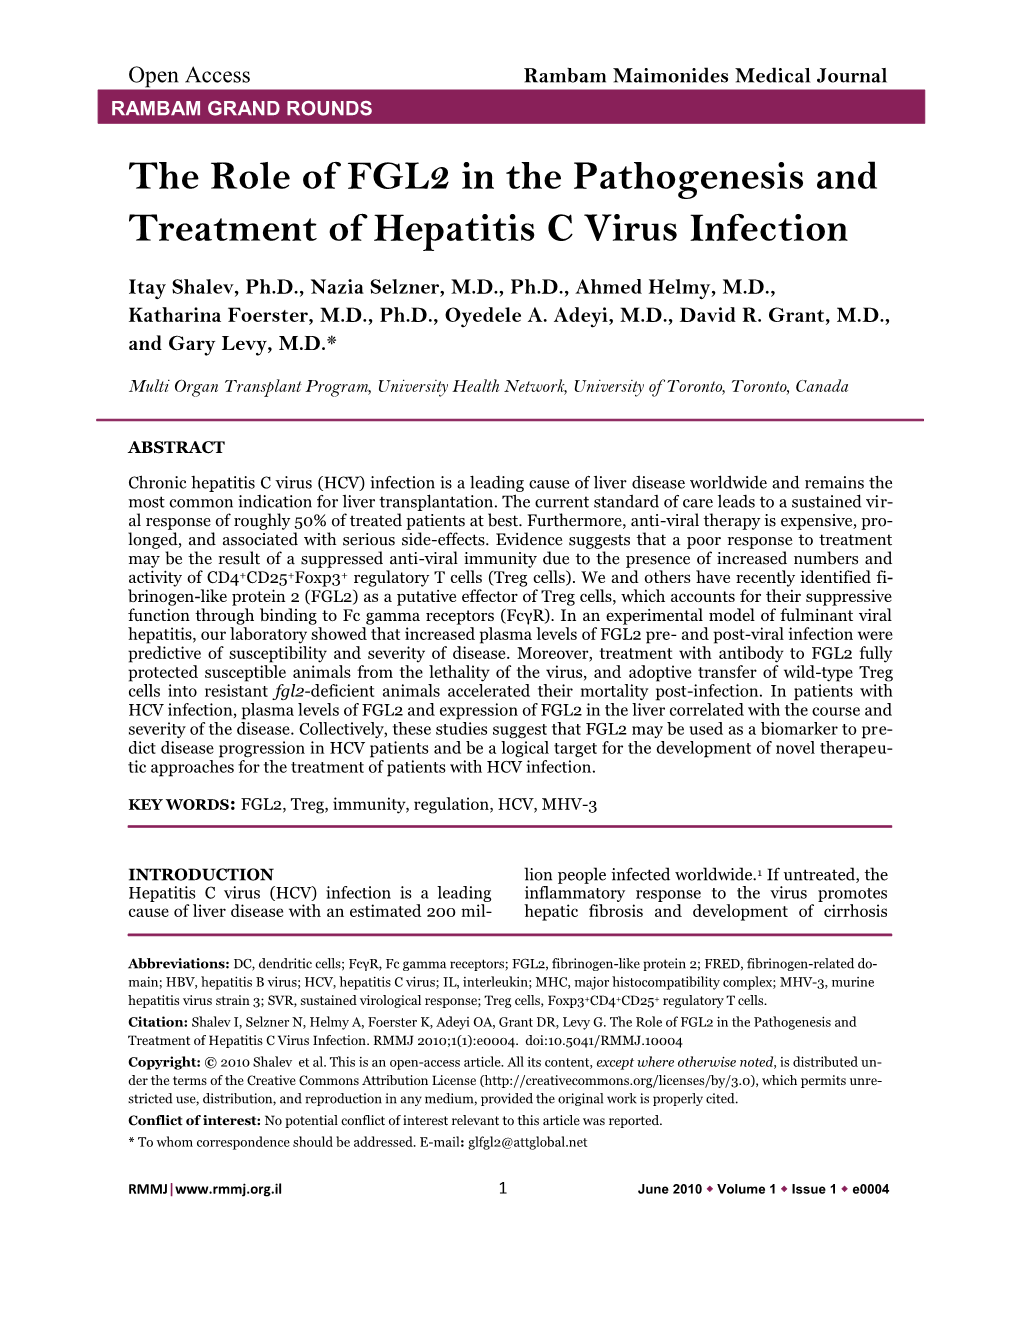 The Role of FGL2 in the Pathogenesis and Treatment of Hepatitis C Virus Infection